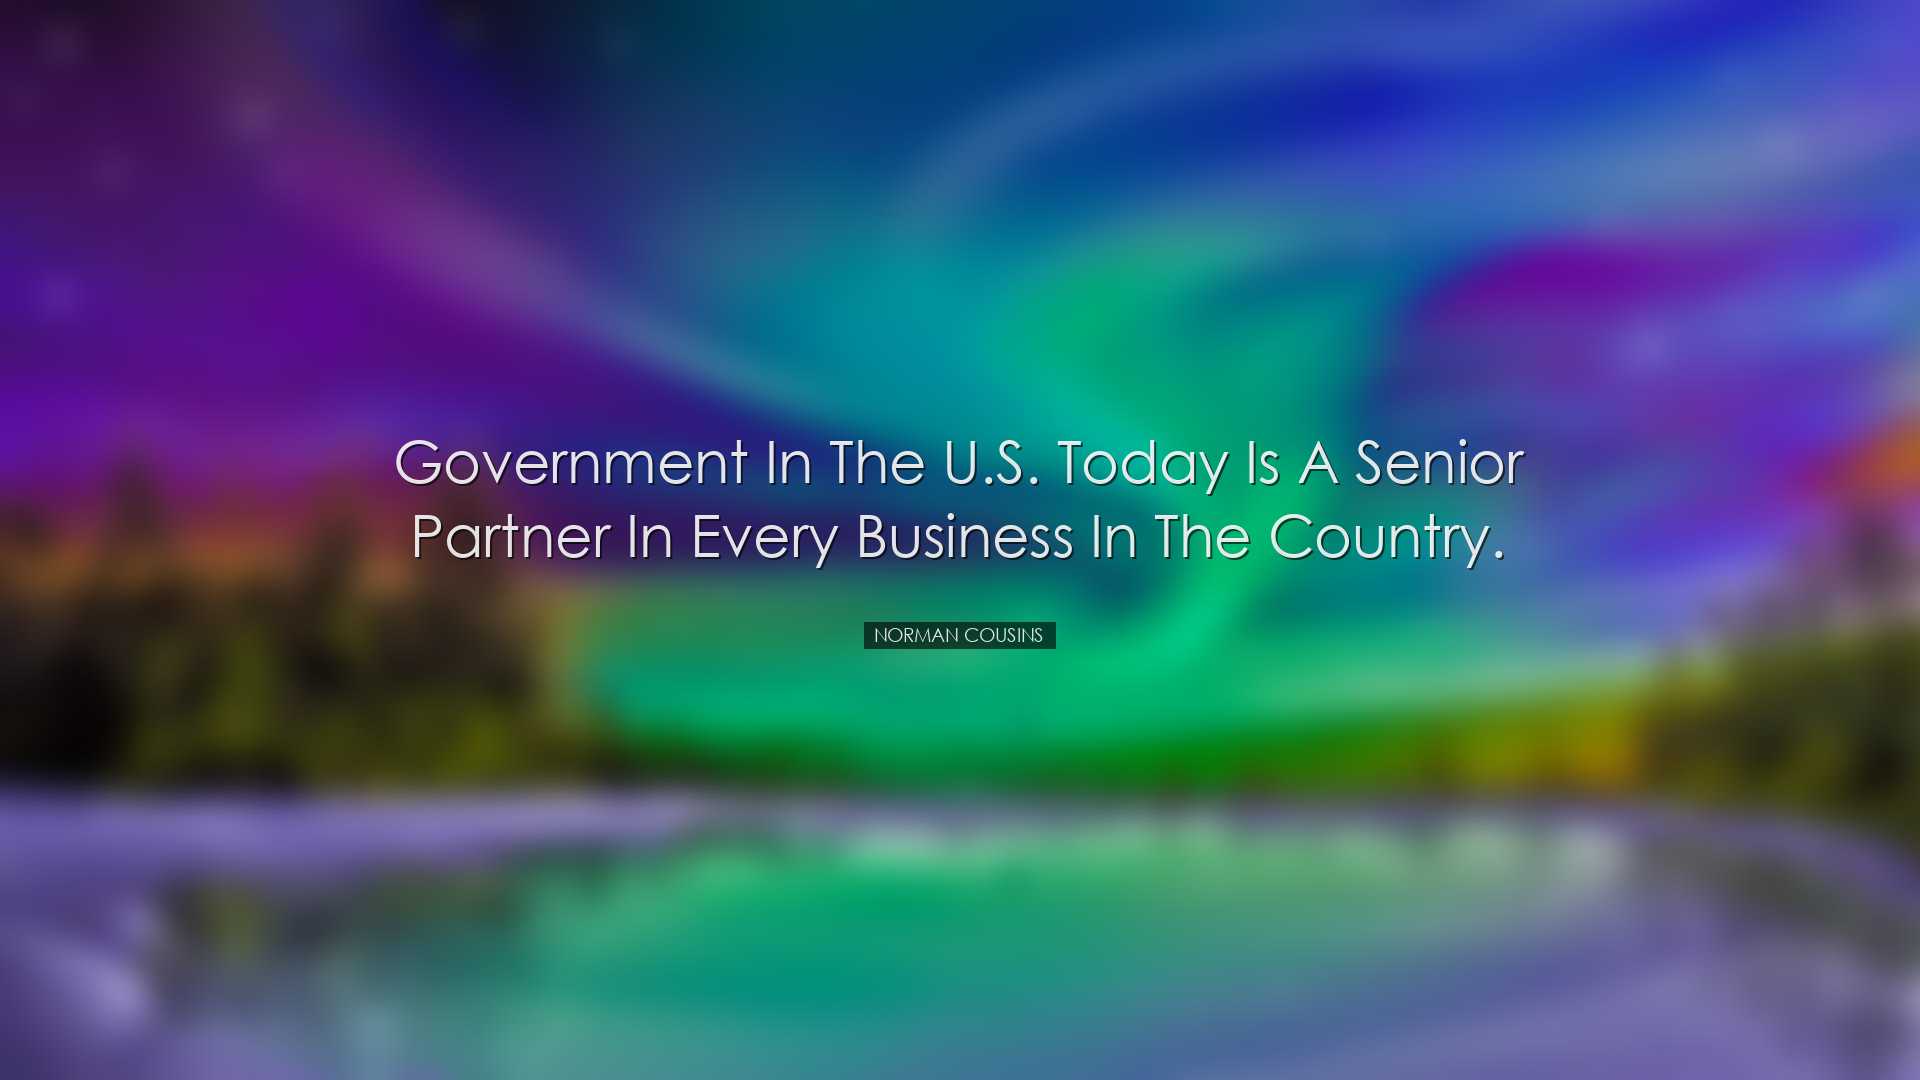 Government in the U.S. today is a senior partner in every business